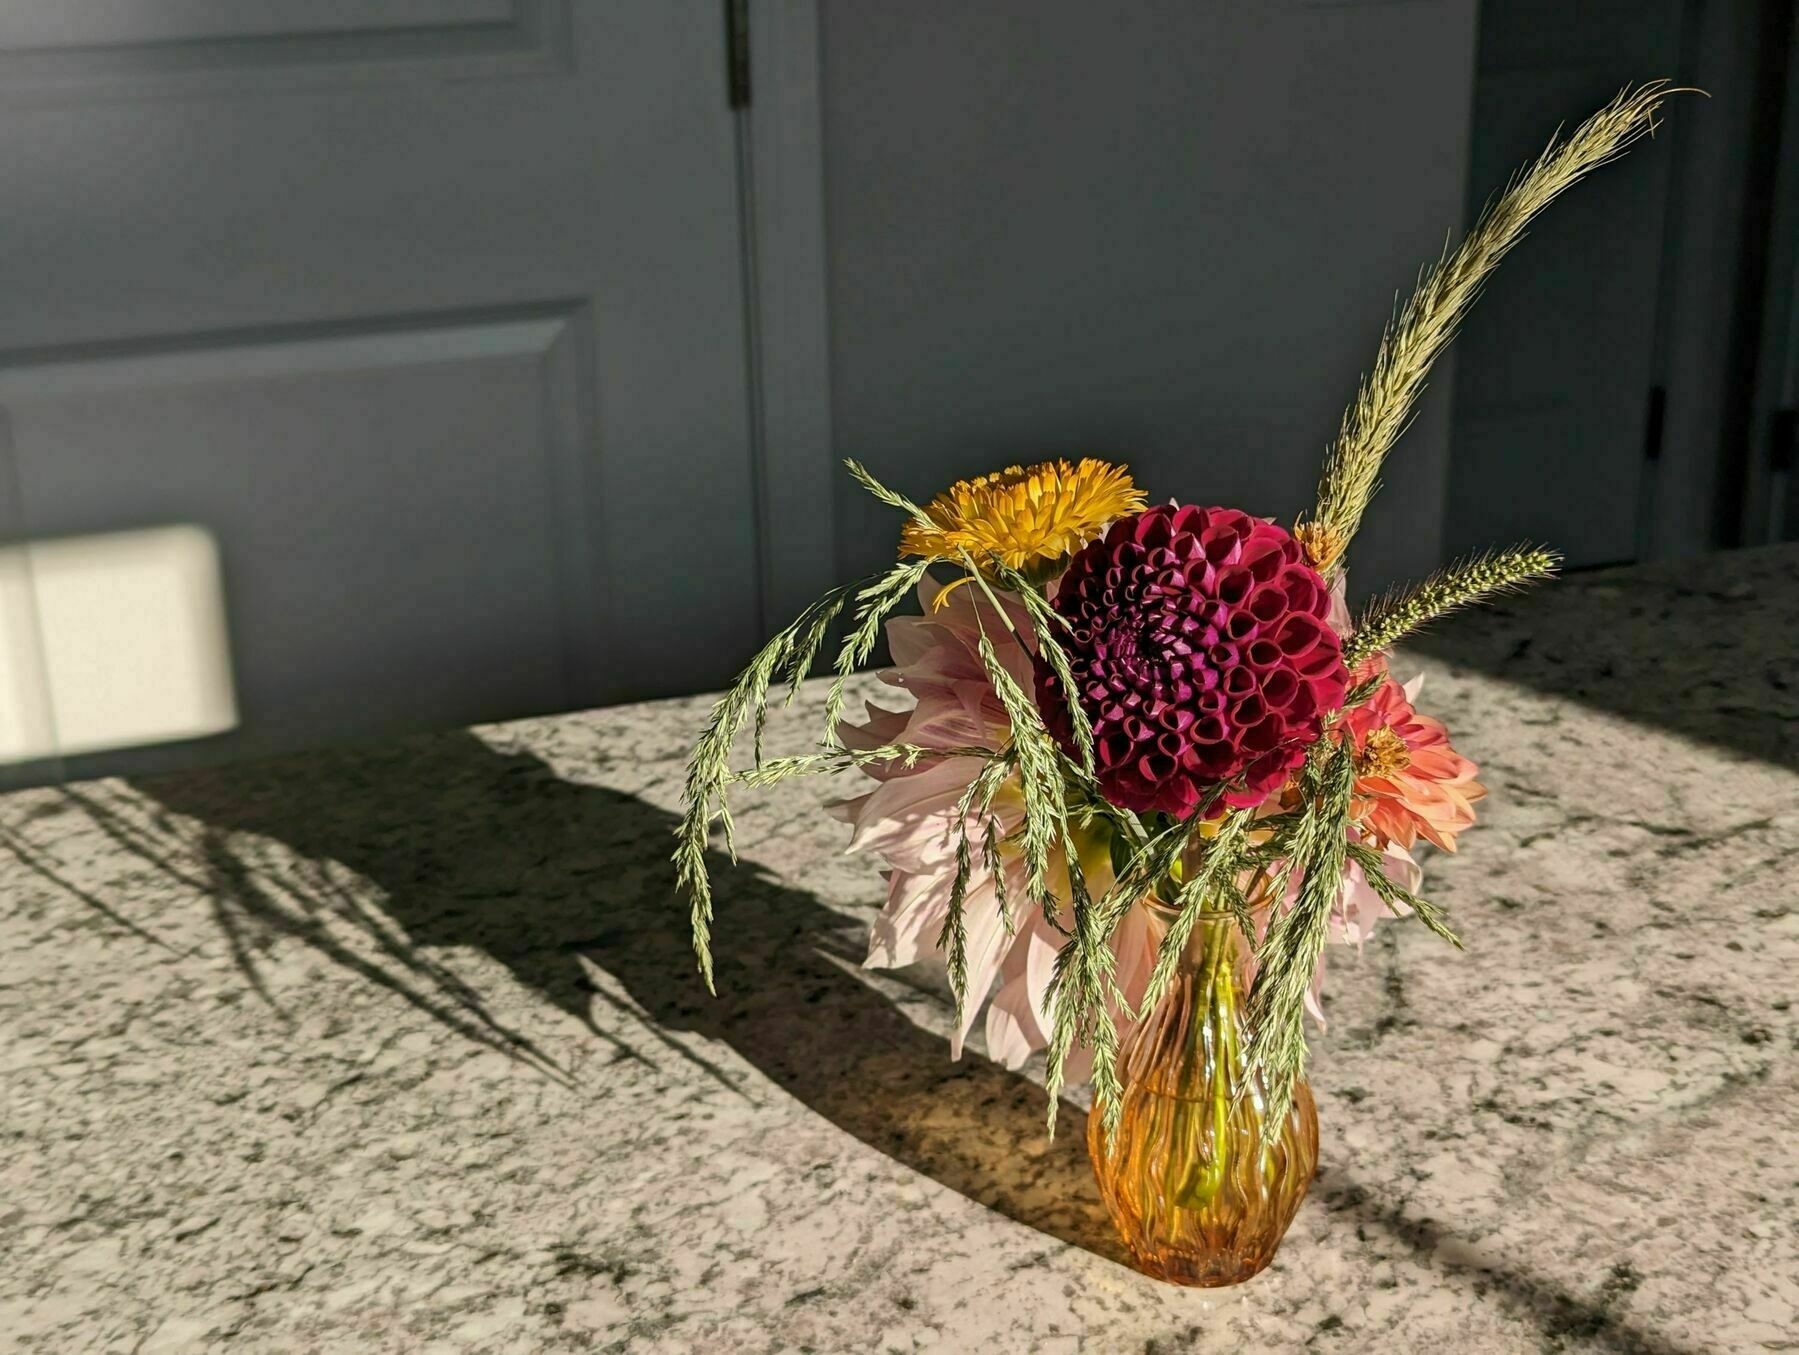 A bouquet of pink and yellow flowers with mature tall grasses intermixed. Sitting on a faux qaurtz countertop with bright sunlight casting a long shadow away from the bouquet.